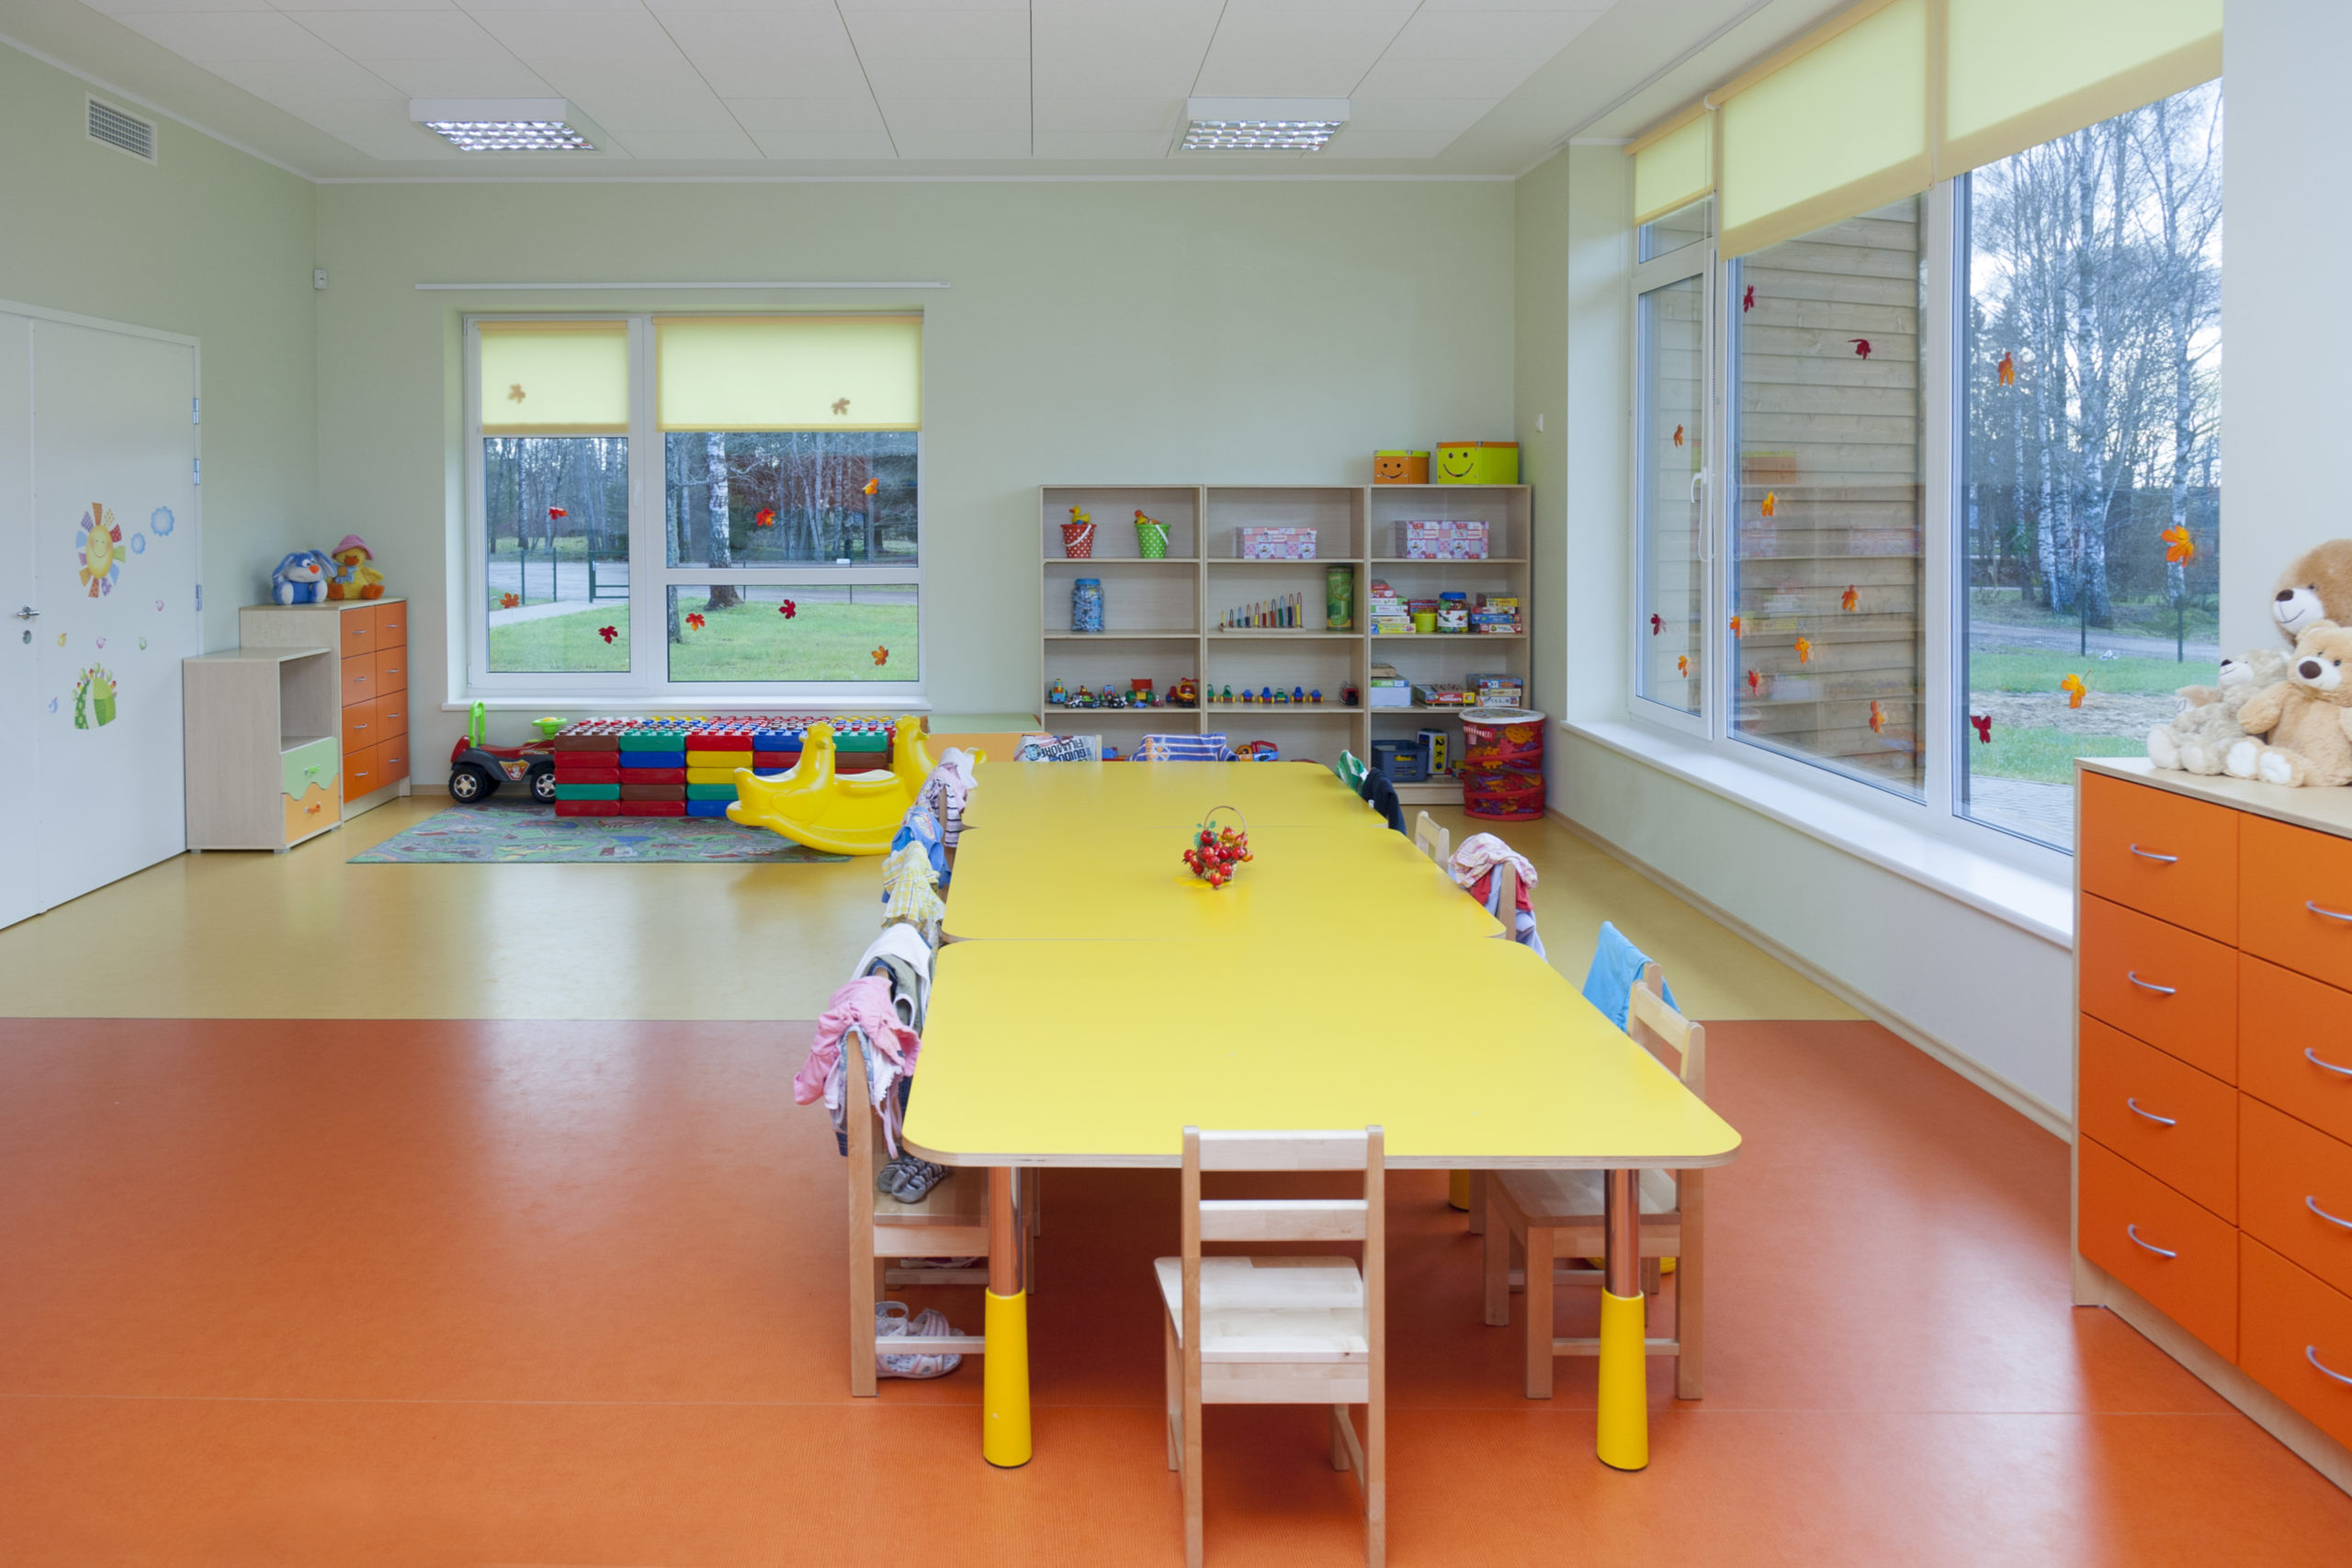 What To Look For When Choosing A Daycare